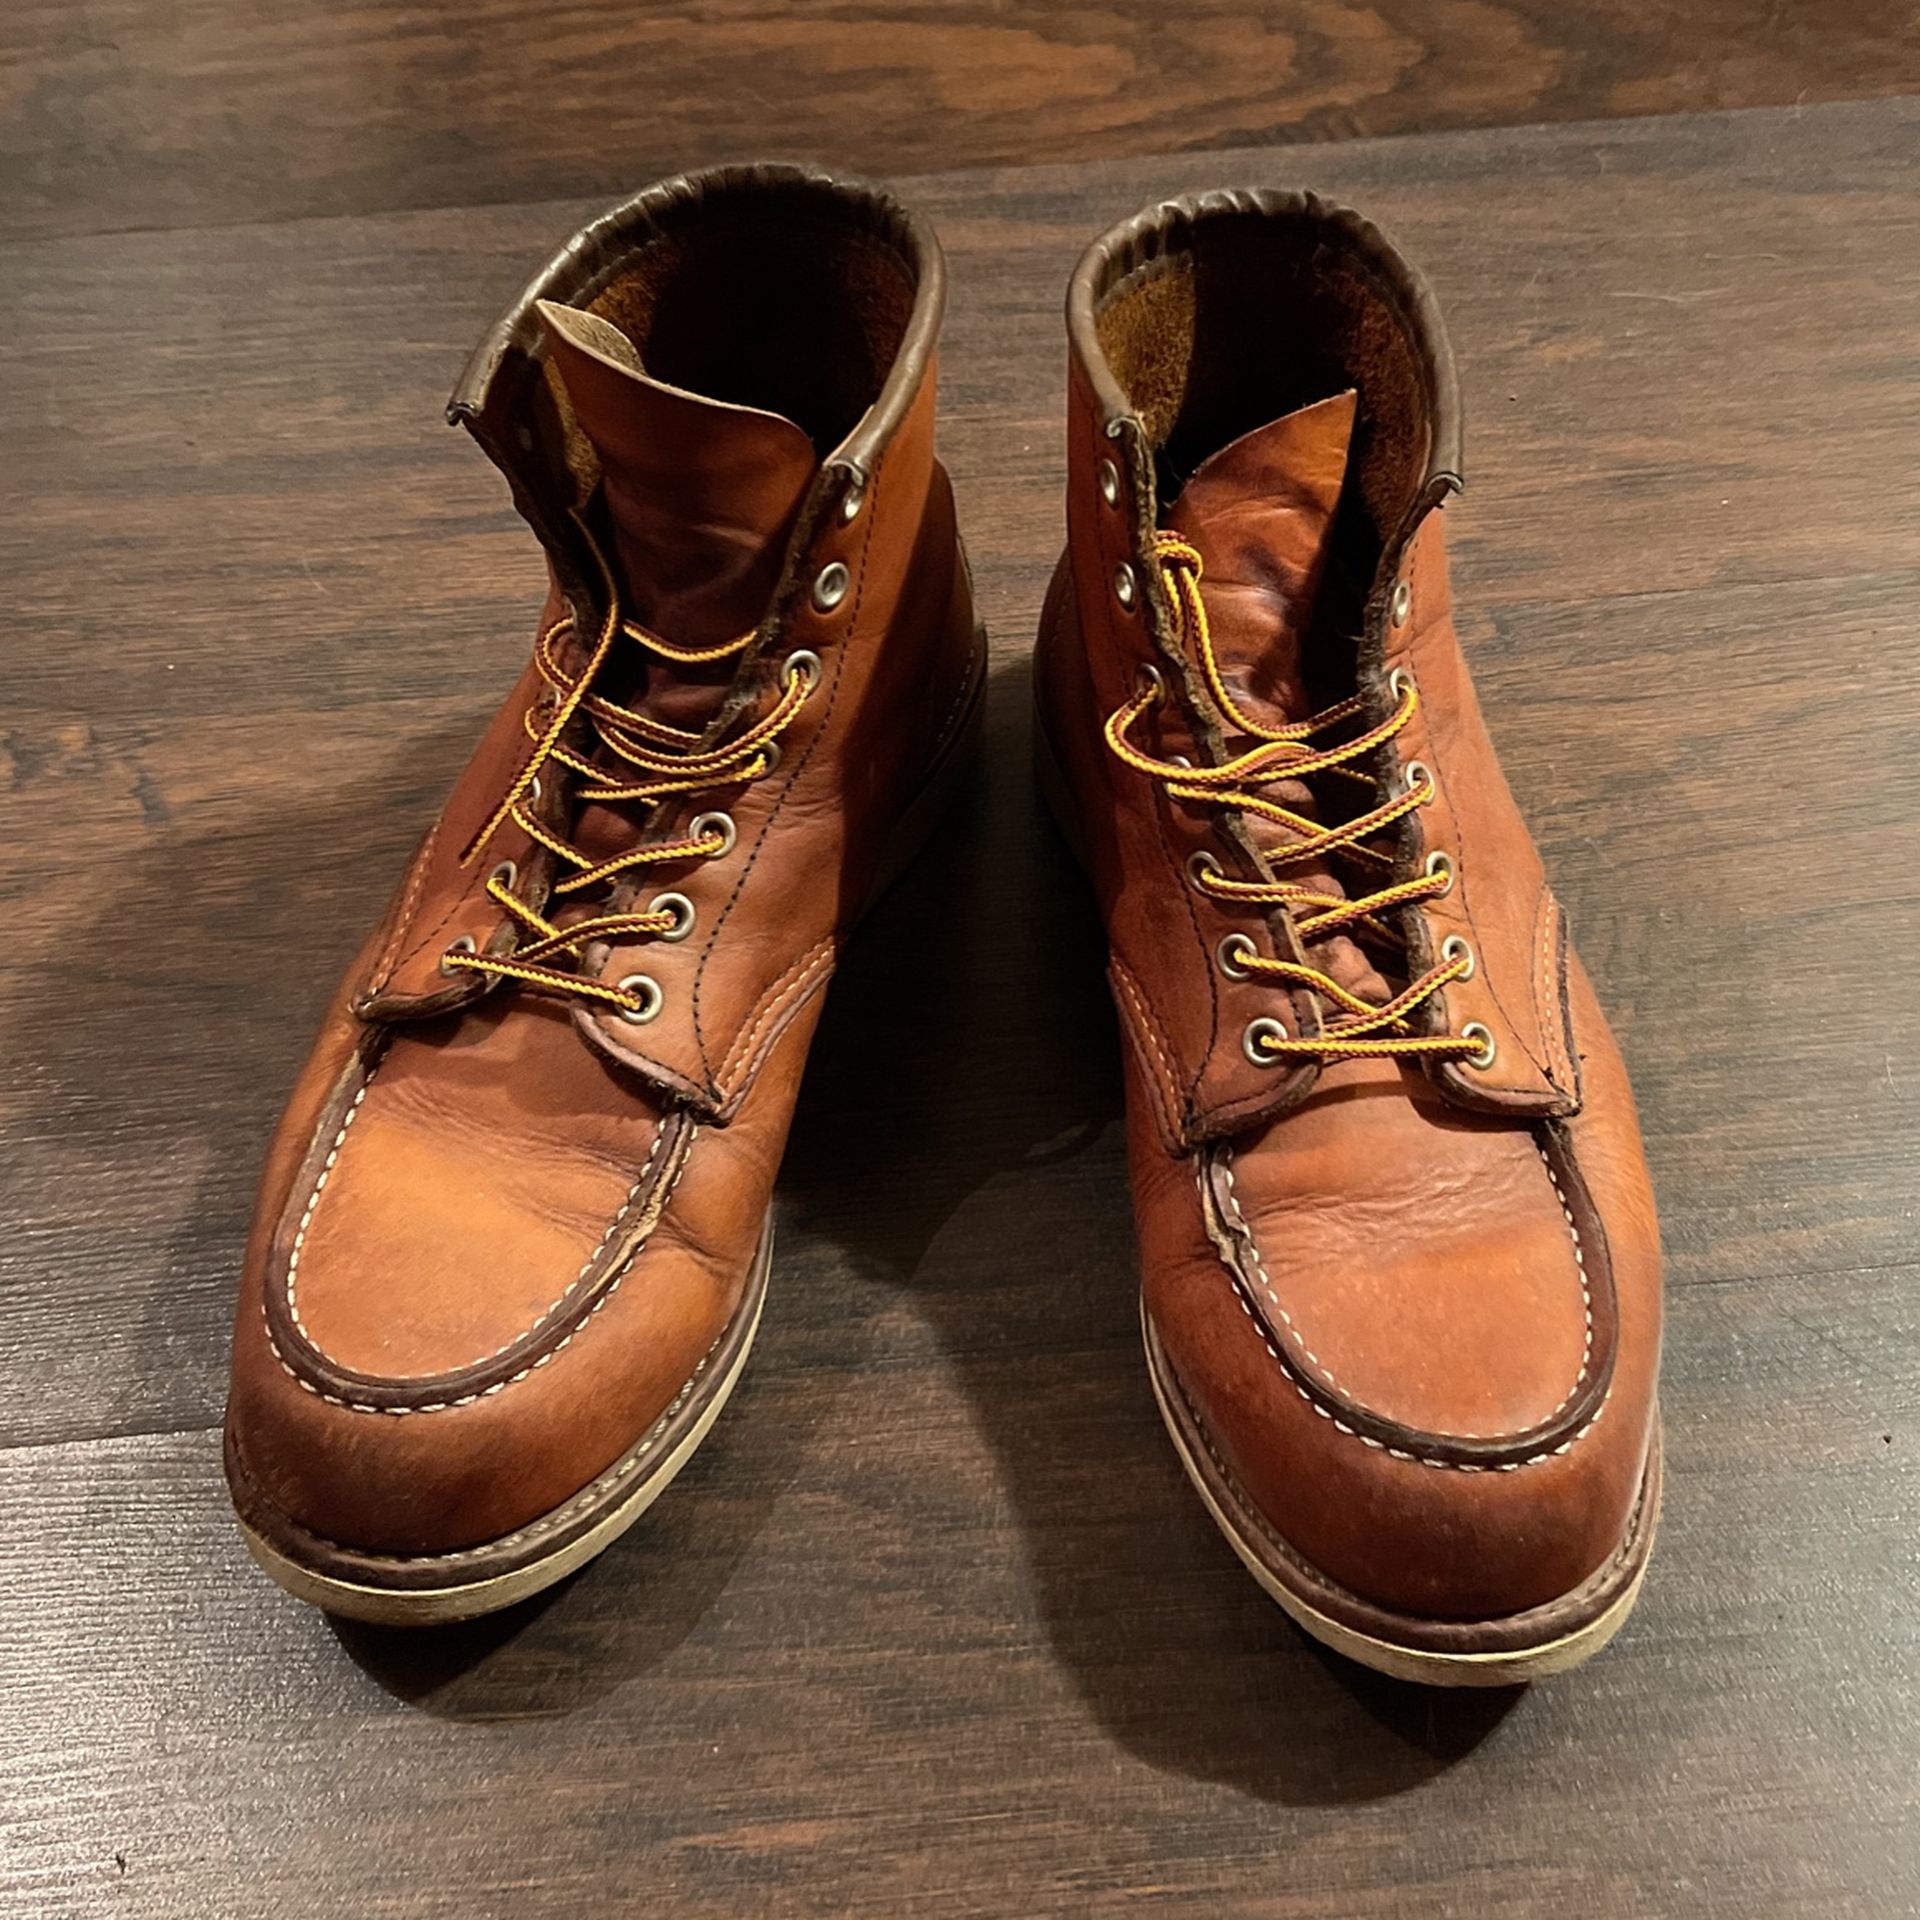 Sold Red Wing Boots ! Used 